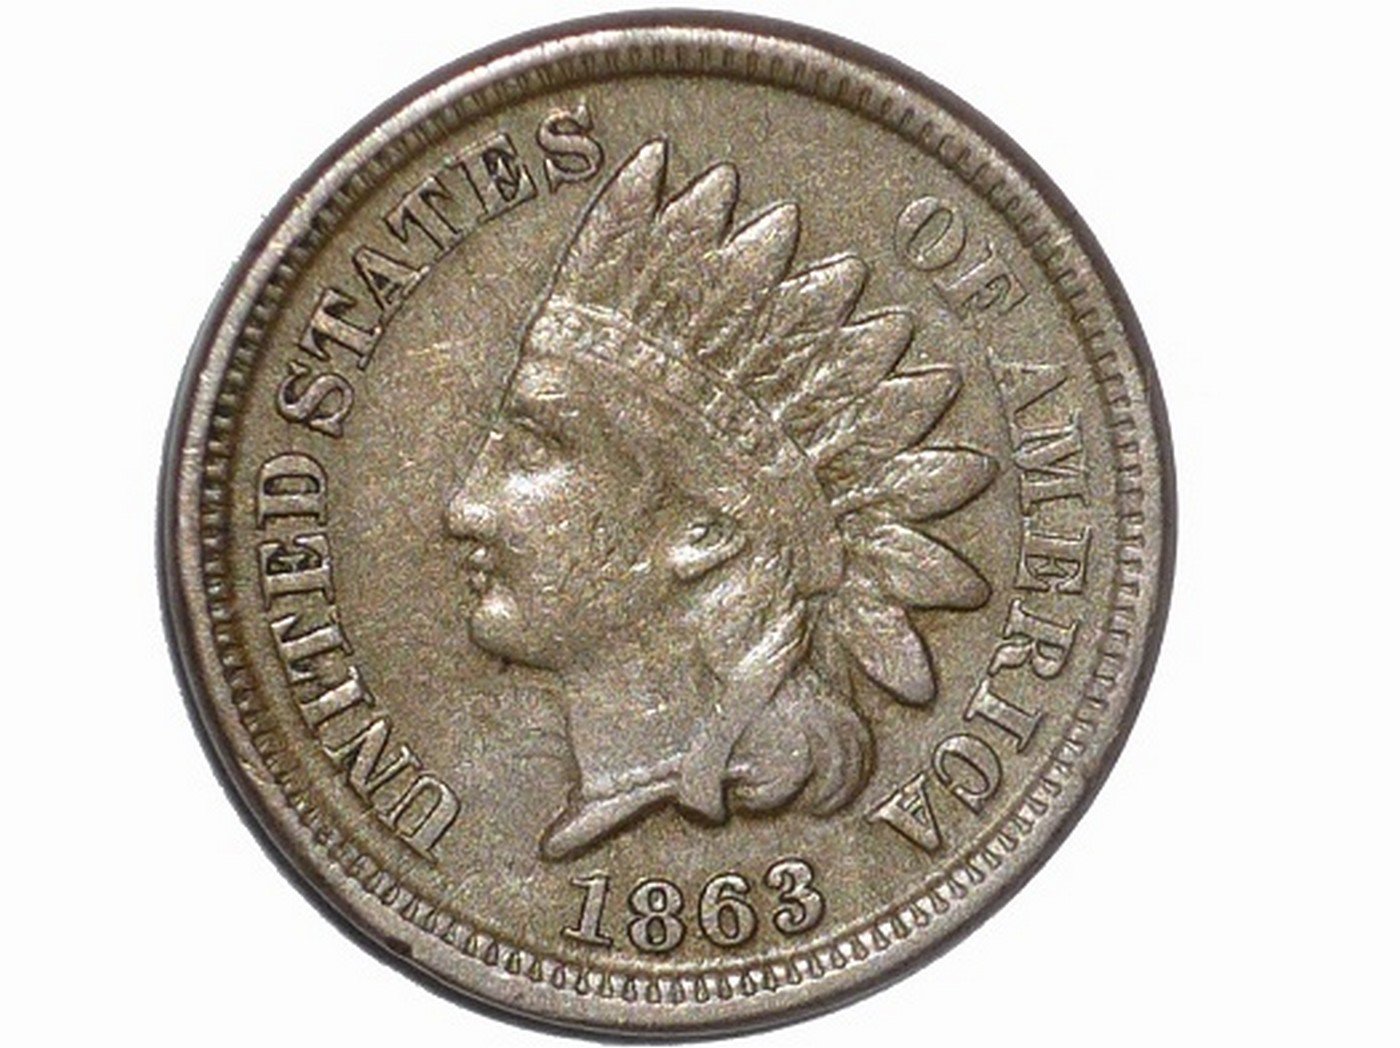 1863 Obverse of CUD-003 - Indian Head Penny - Photo by David Poliquin